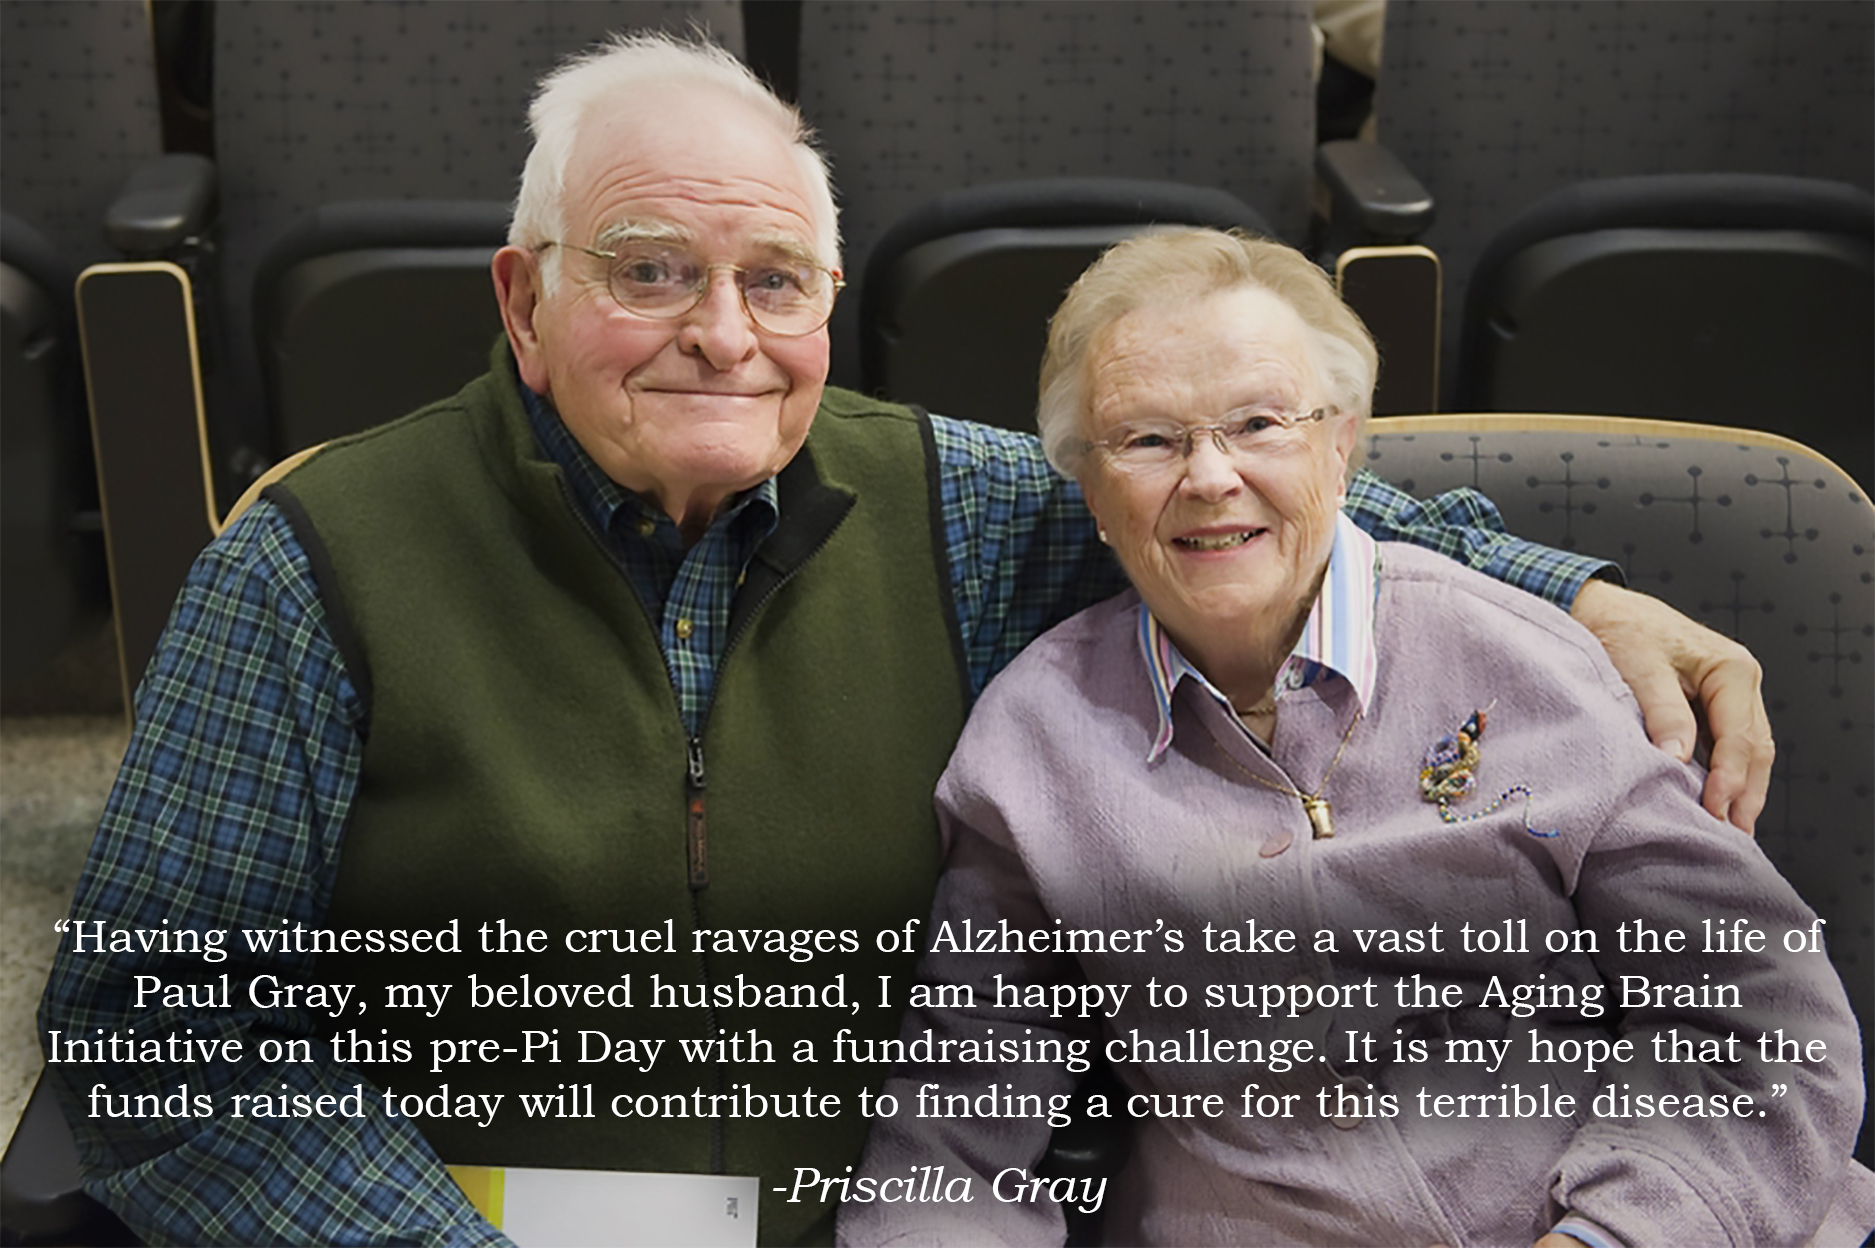 A picture of Paul Gray and Priscilla King Gray seated together in an auditorium. An overlaid quote reads: "Having witnessed the cruel ravages of Alzheimer's take a vast toll on the life of Paul Gray, my beloved husband, I am happy to support the Aging Brain Initiative on this pre-Pi Day with a fundraising challenge. It is my hope that the funds raised today will contribute to finding a cure for this terrible disease."